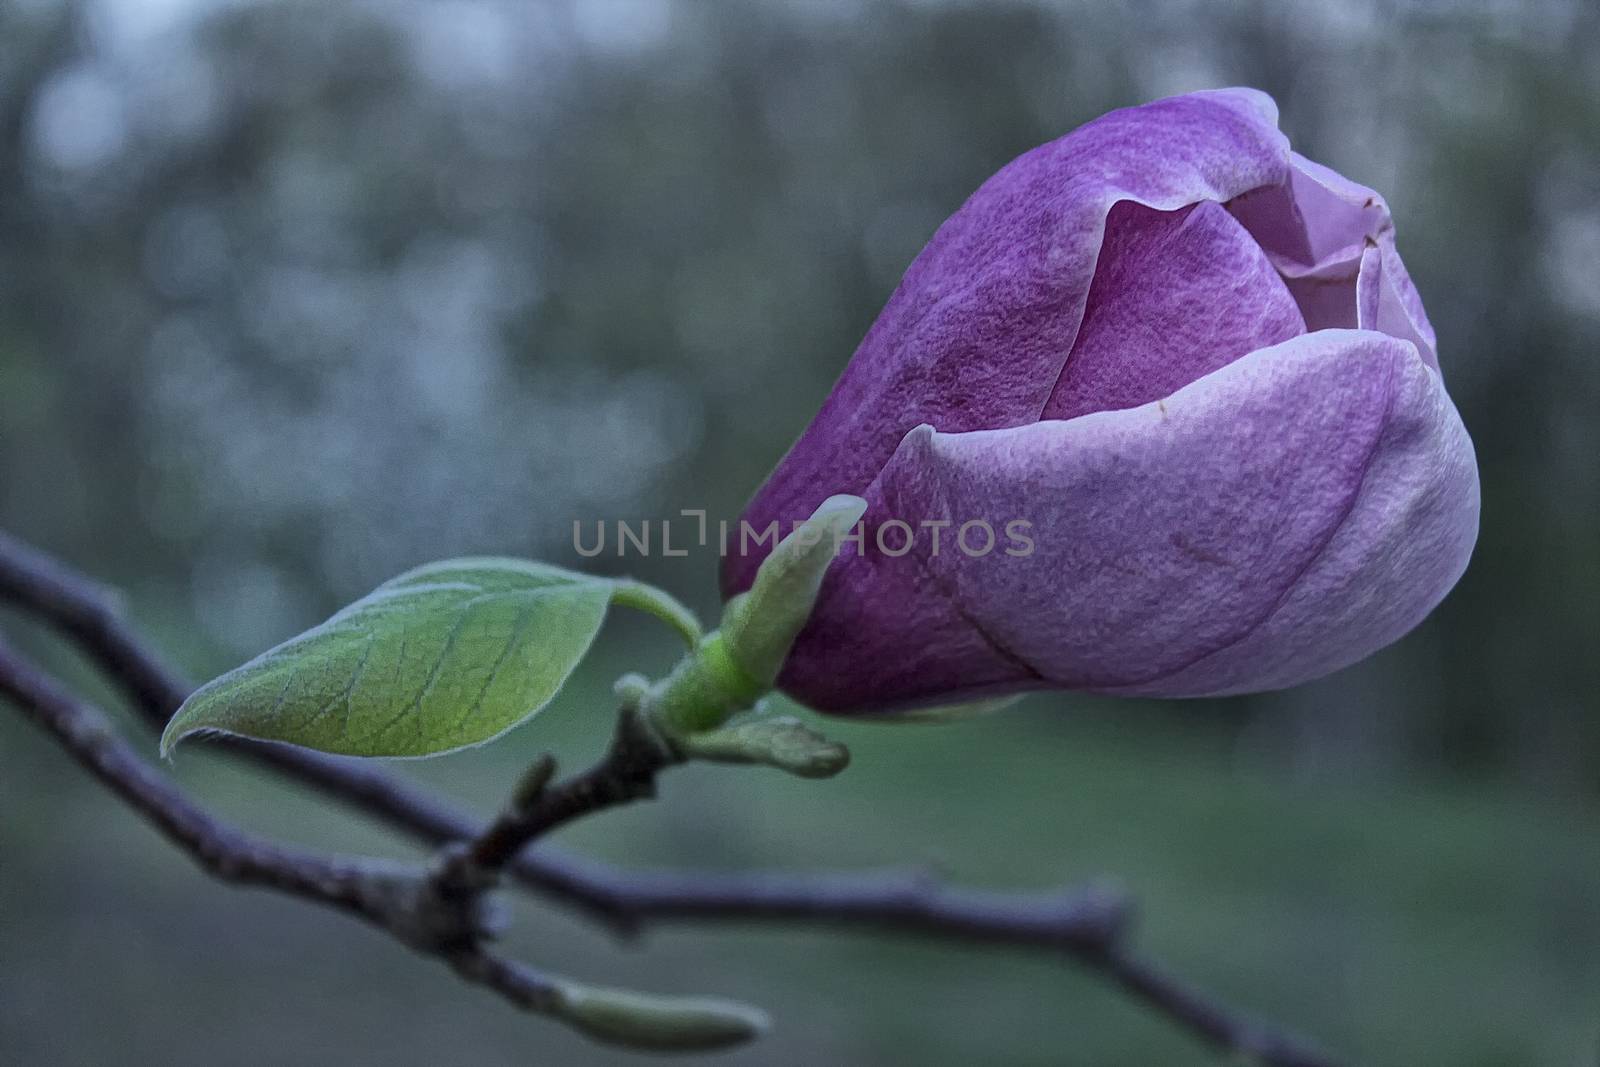 Purple magnolia flower with a green leaf on a tree bench, shallow DOF.